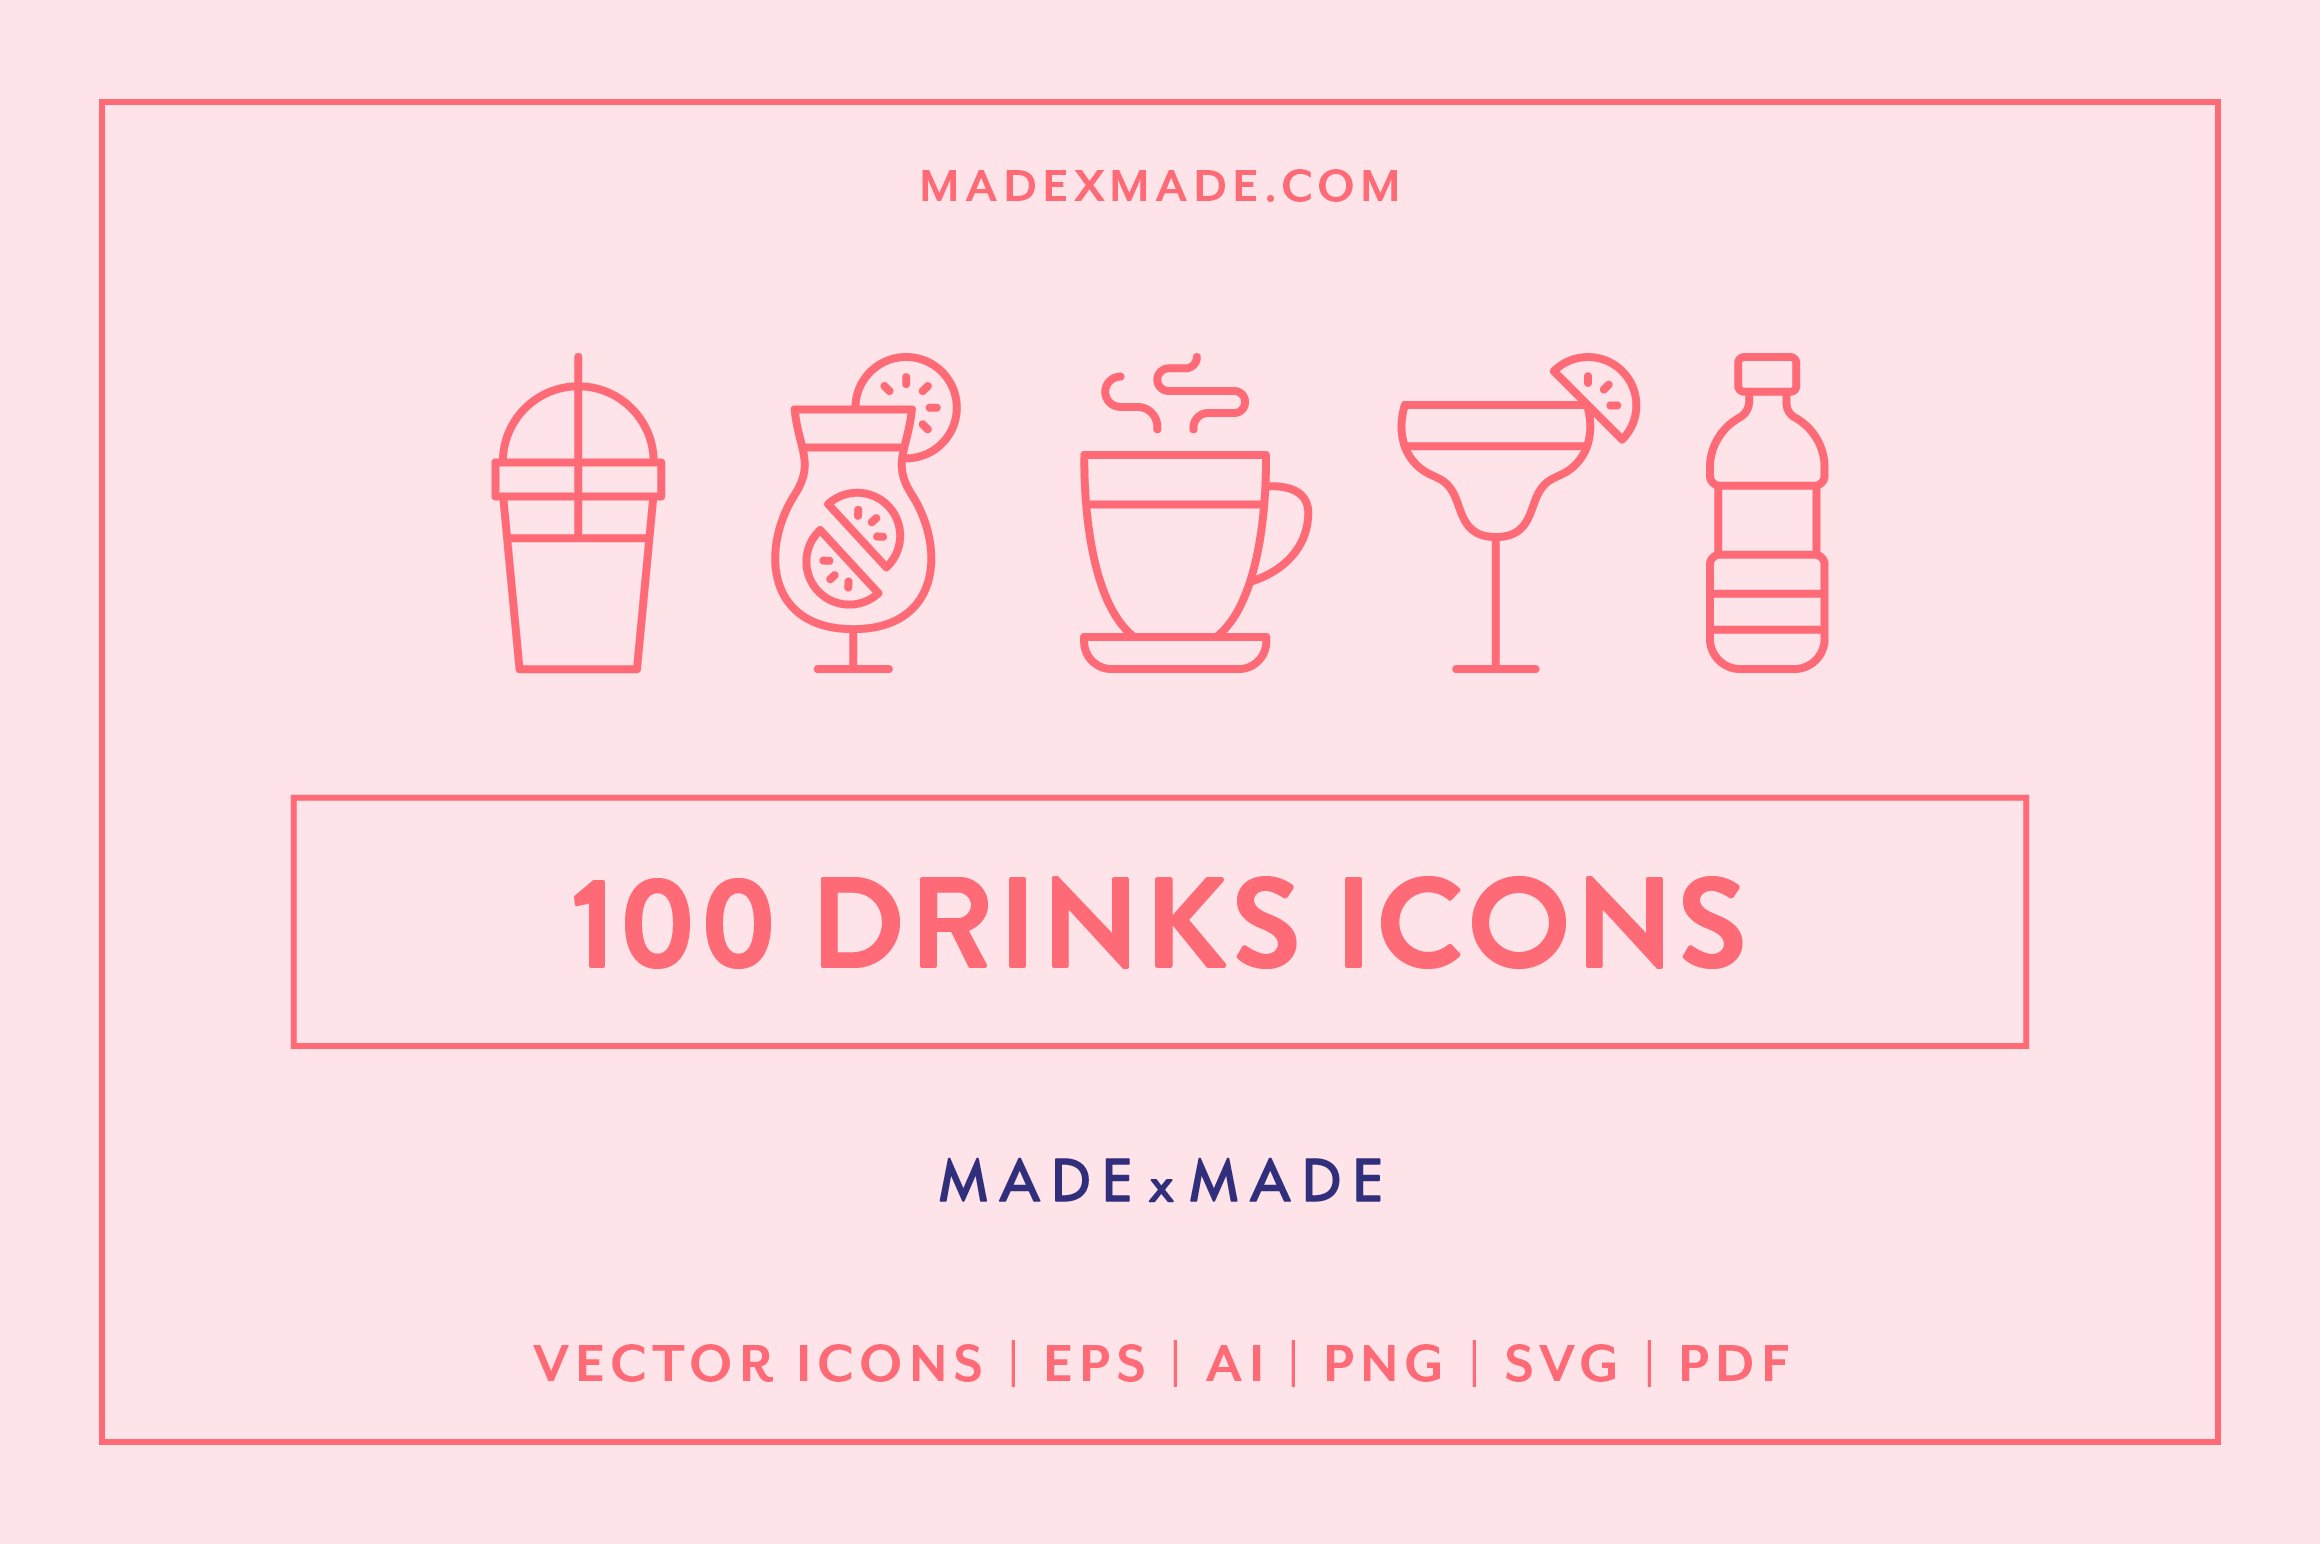 Drinks Line Icons cover image.